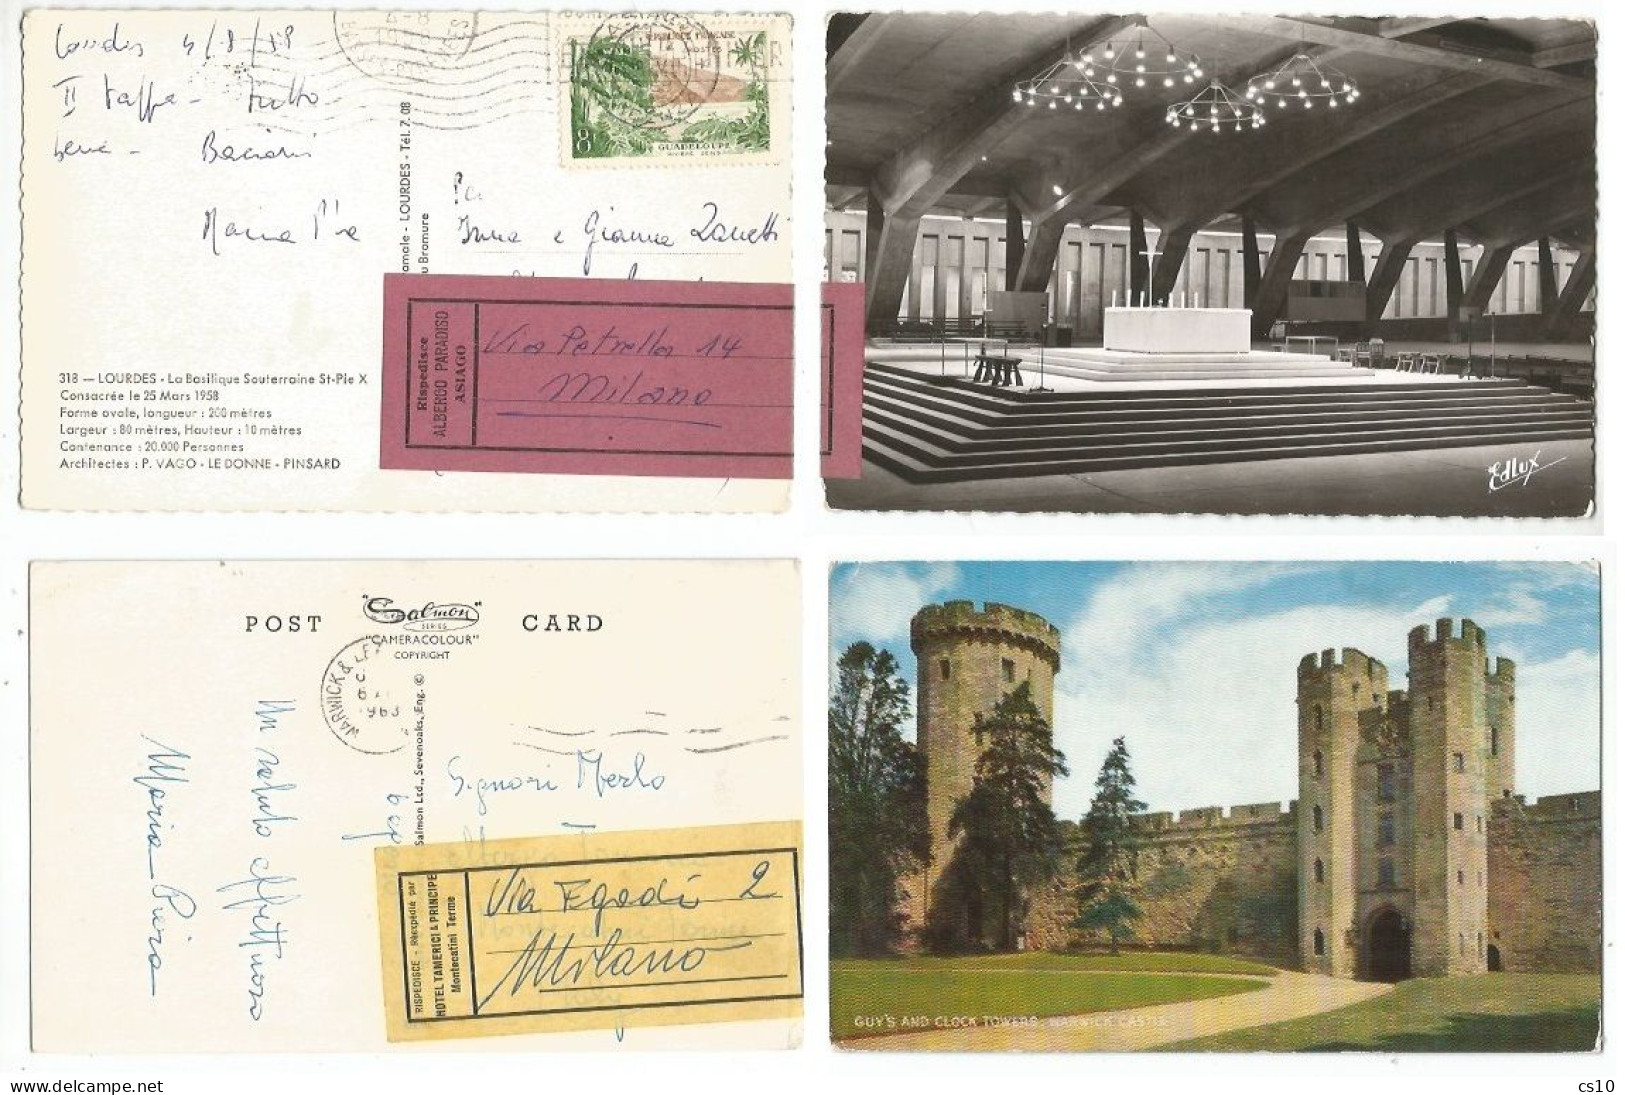 Hotel Mail Forwarding Labels # 2 Pcards From UK & France By 2 Different Italy Hotels Asiago 1958 & Montecatini Terme '63 - Correo Postal